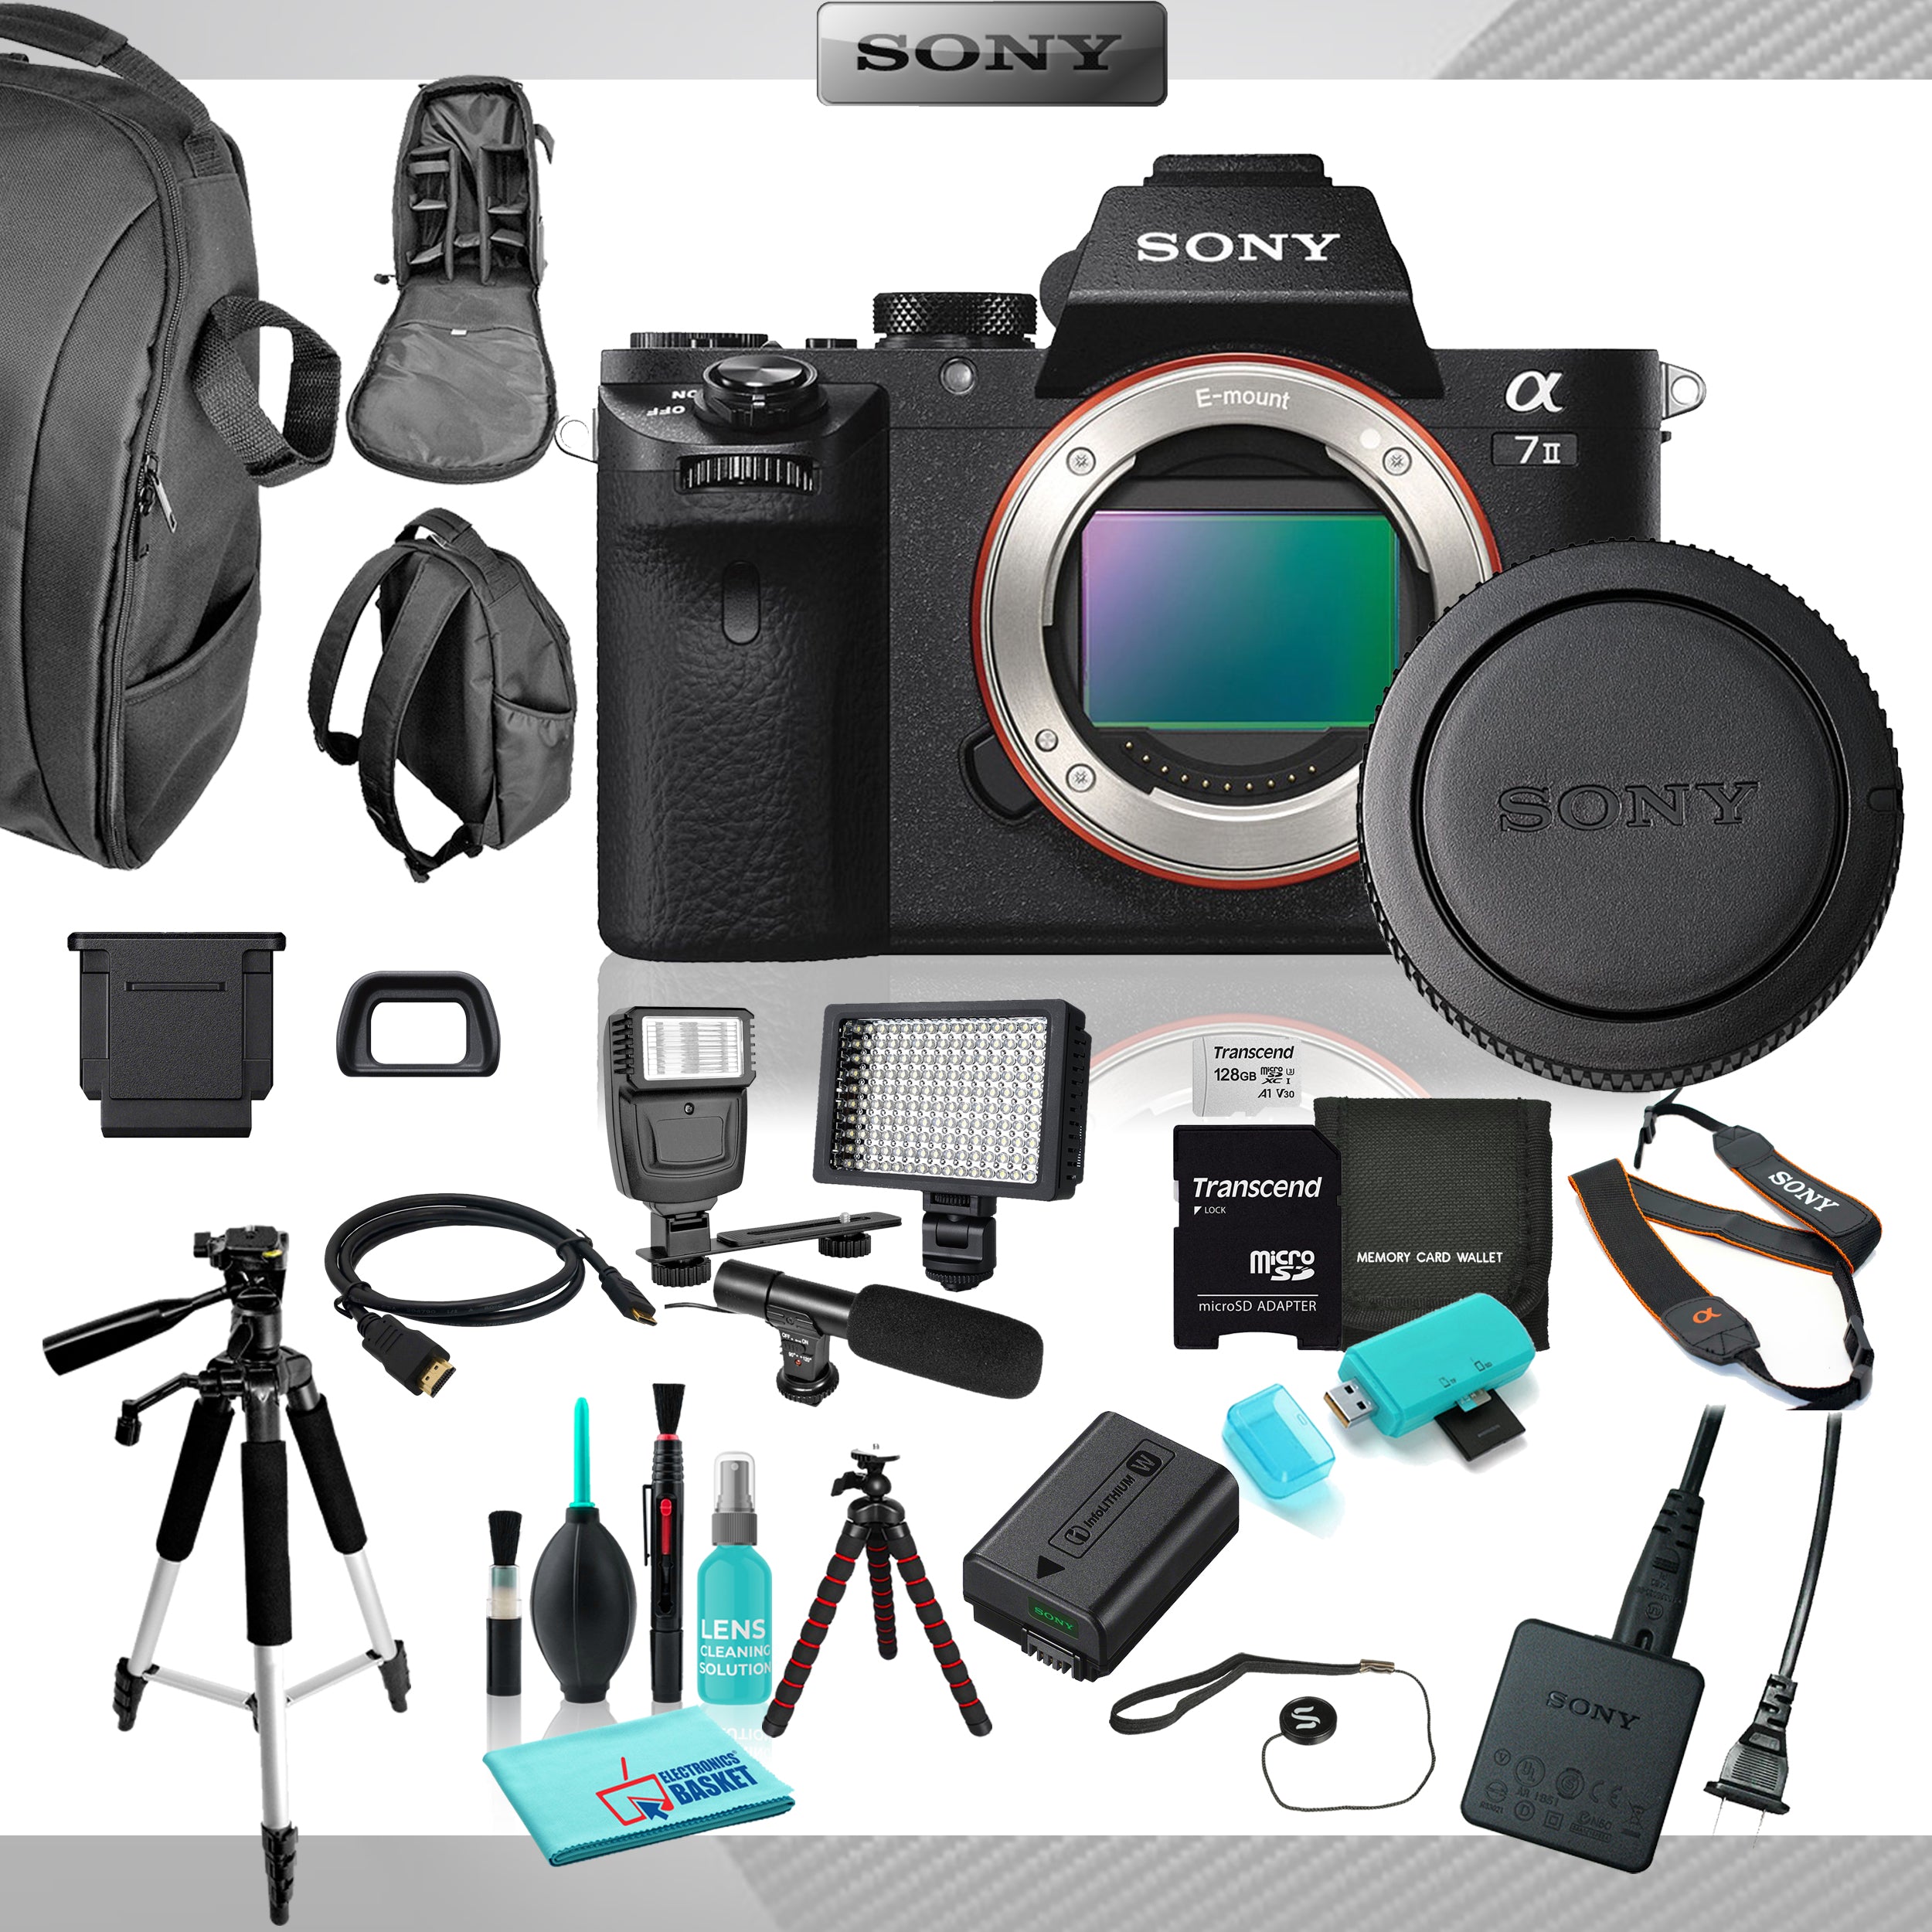 Sony Alpha a7 II Mirrorless Digital Camera (Body Only), 24.3MP Full-Frame Exmor CMOS Sensor with 12 Piece Accessories